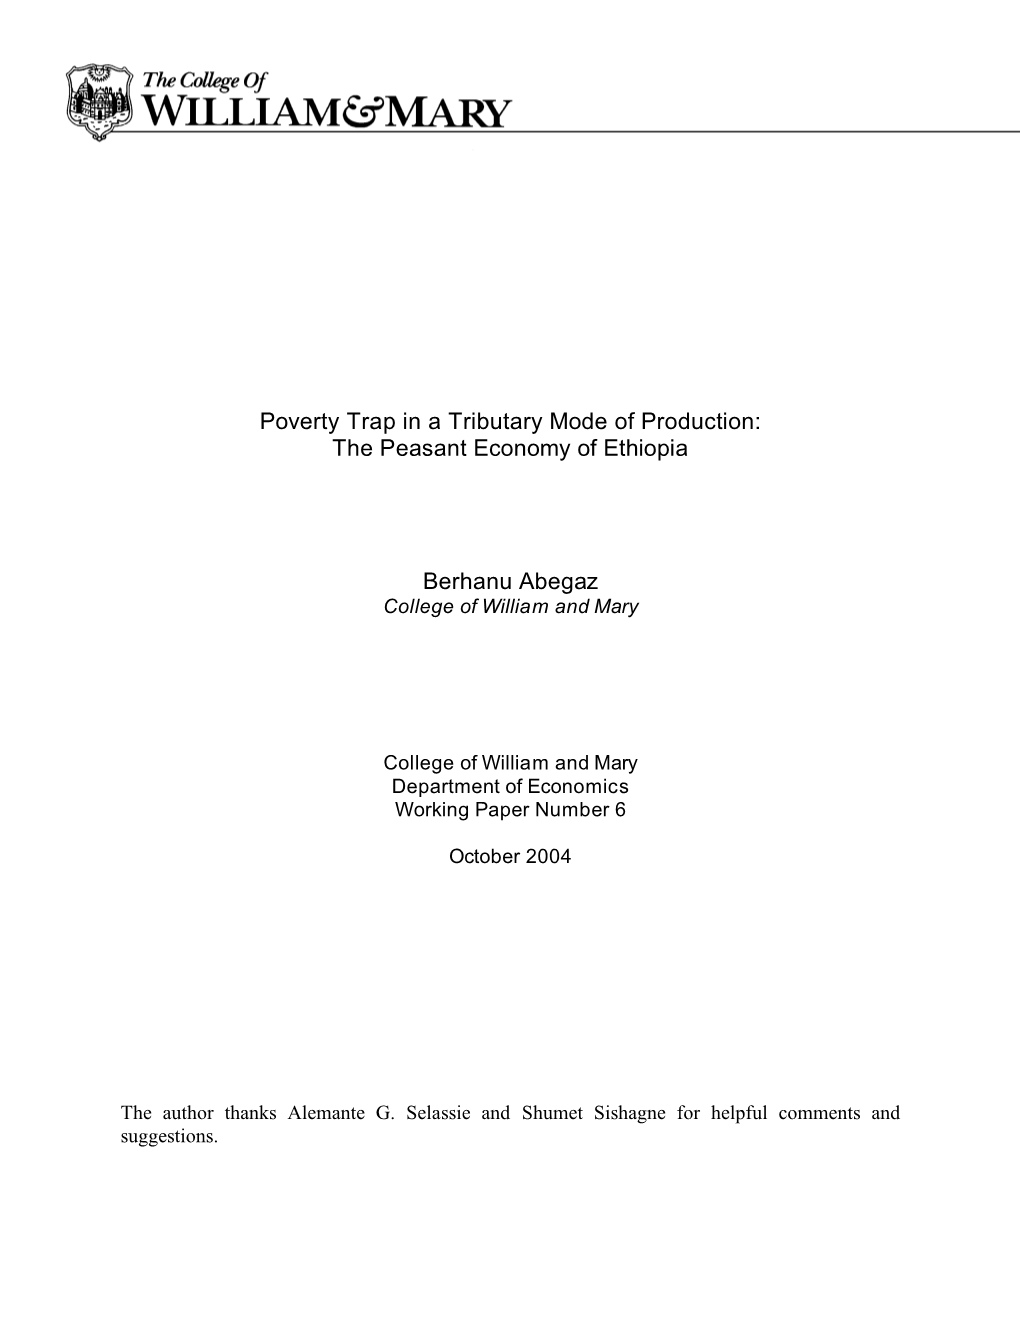 Poverty Trap in a Tributary Mode of Production: the Peasant Economy of Ethiopia